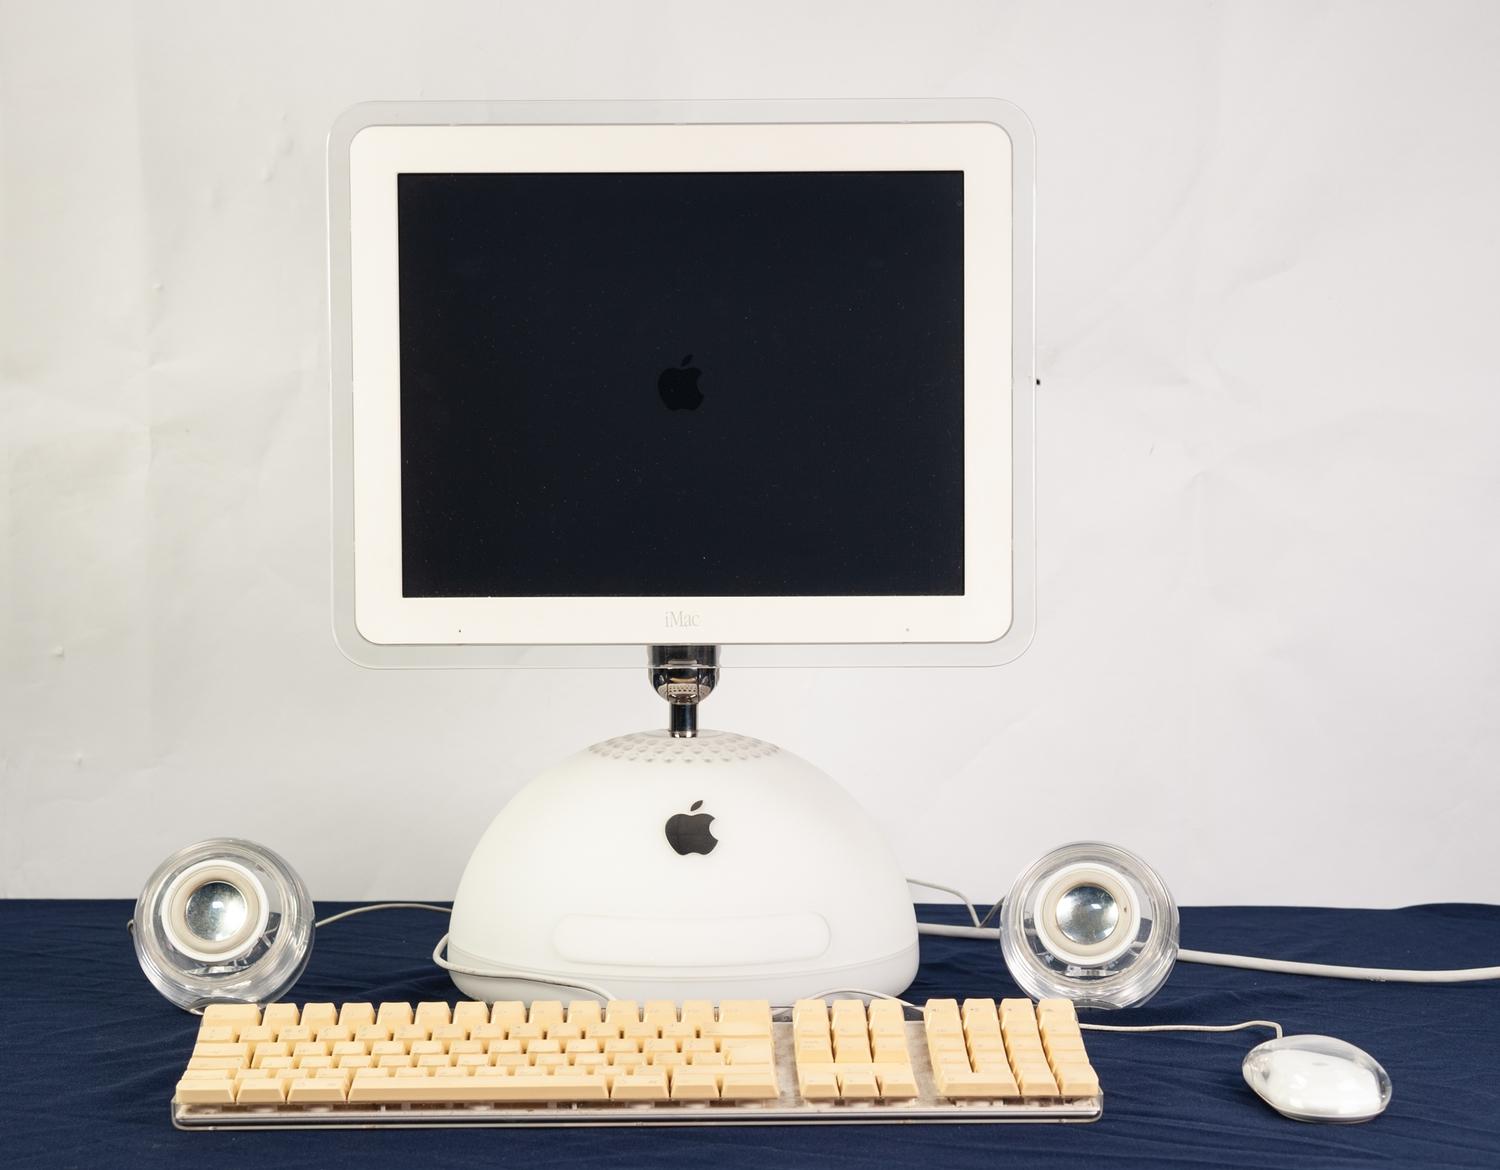 iMAC G4, VERSION 10.5.8, 15 INCH LCD DISPLAY WITH EASY HEIGHT, TILT AND SWIVEL ADJUSTMENT, APPLE - Image 7 of 9